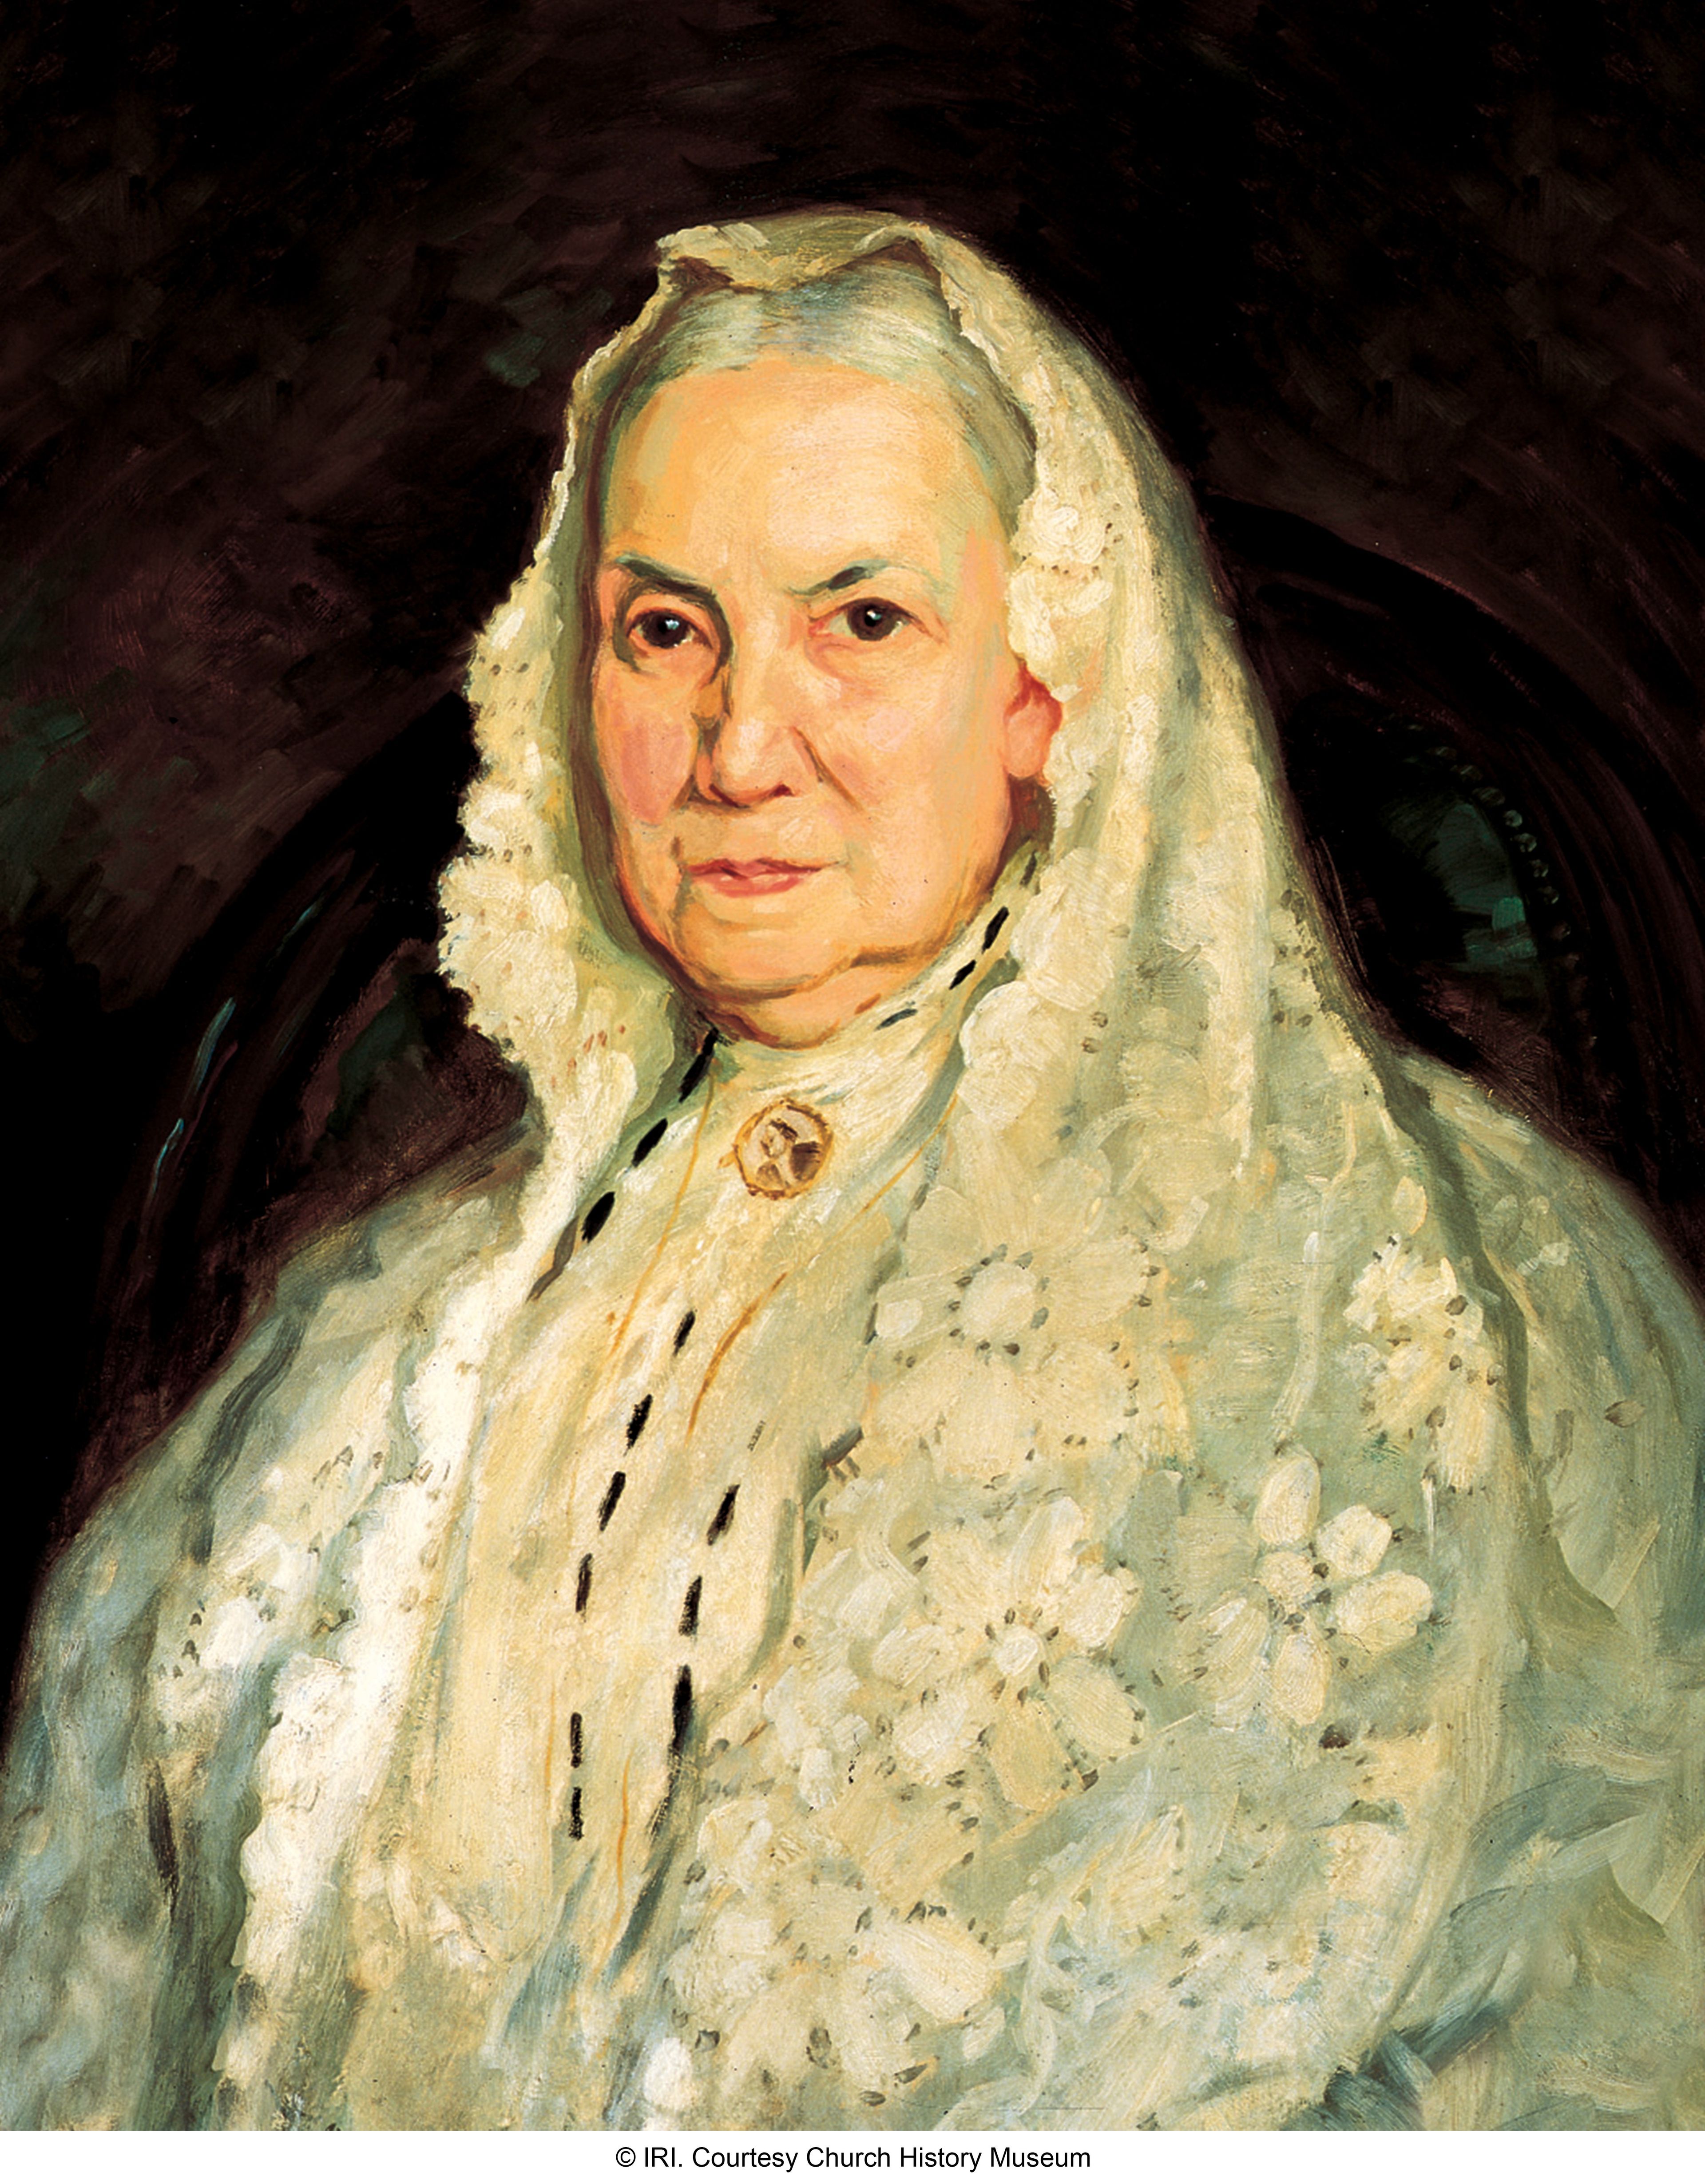 A portrait of Bathsheba W. Smith, who served as the fourth general president of the Relief Society from 1901 to 1910; painted by Lee Greene Richards.